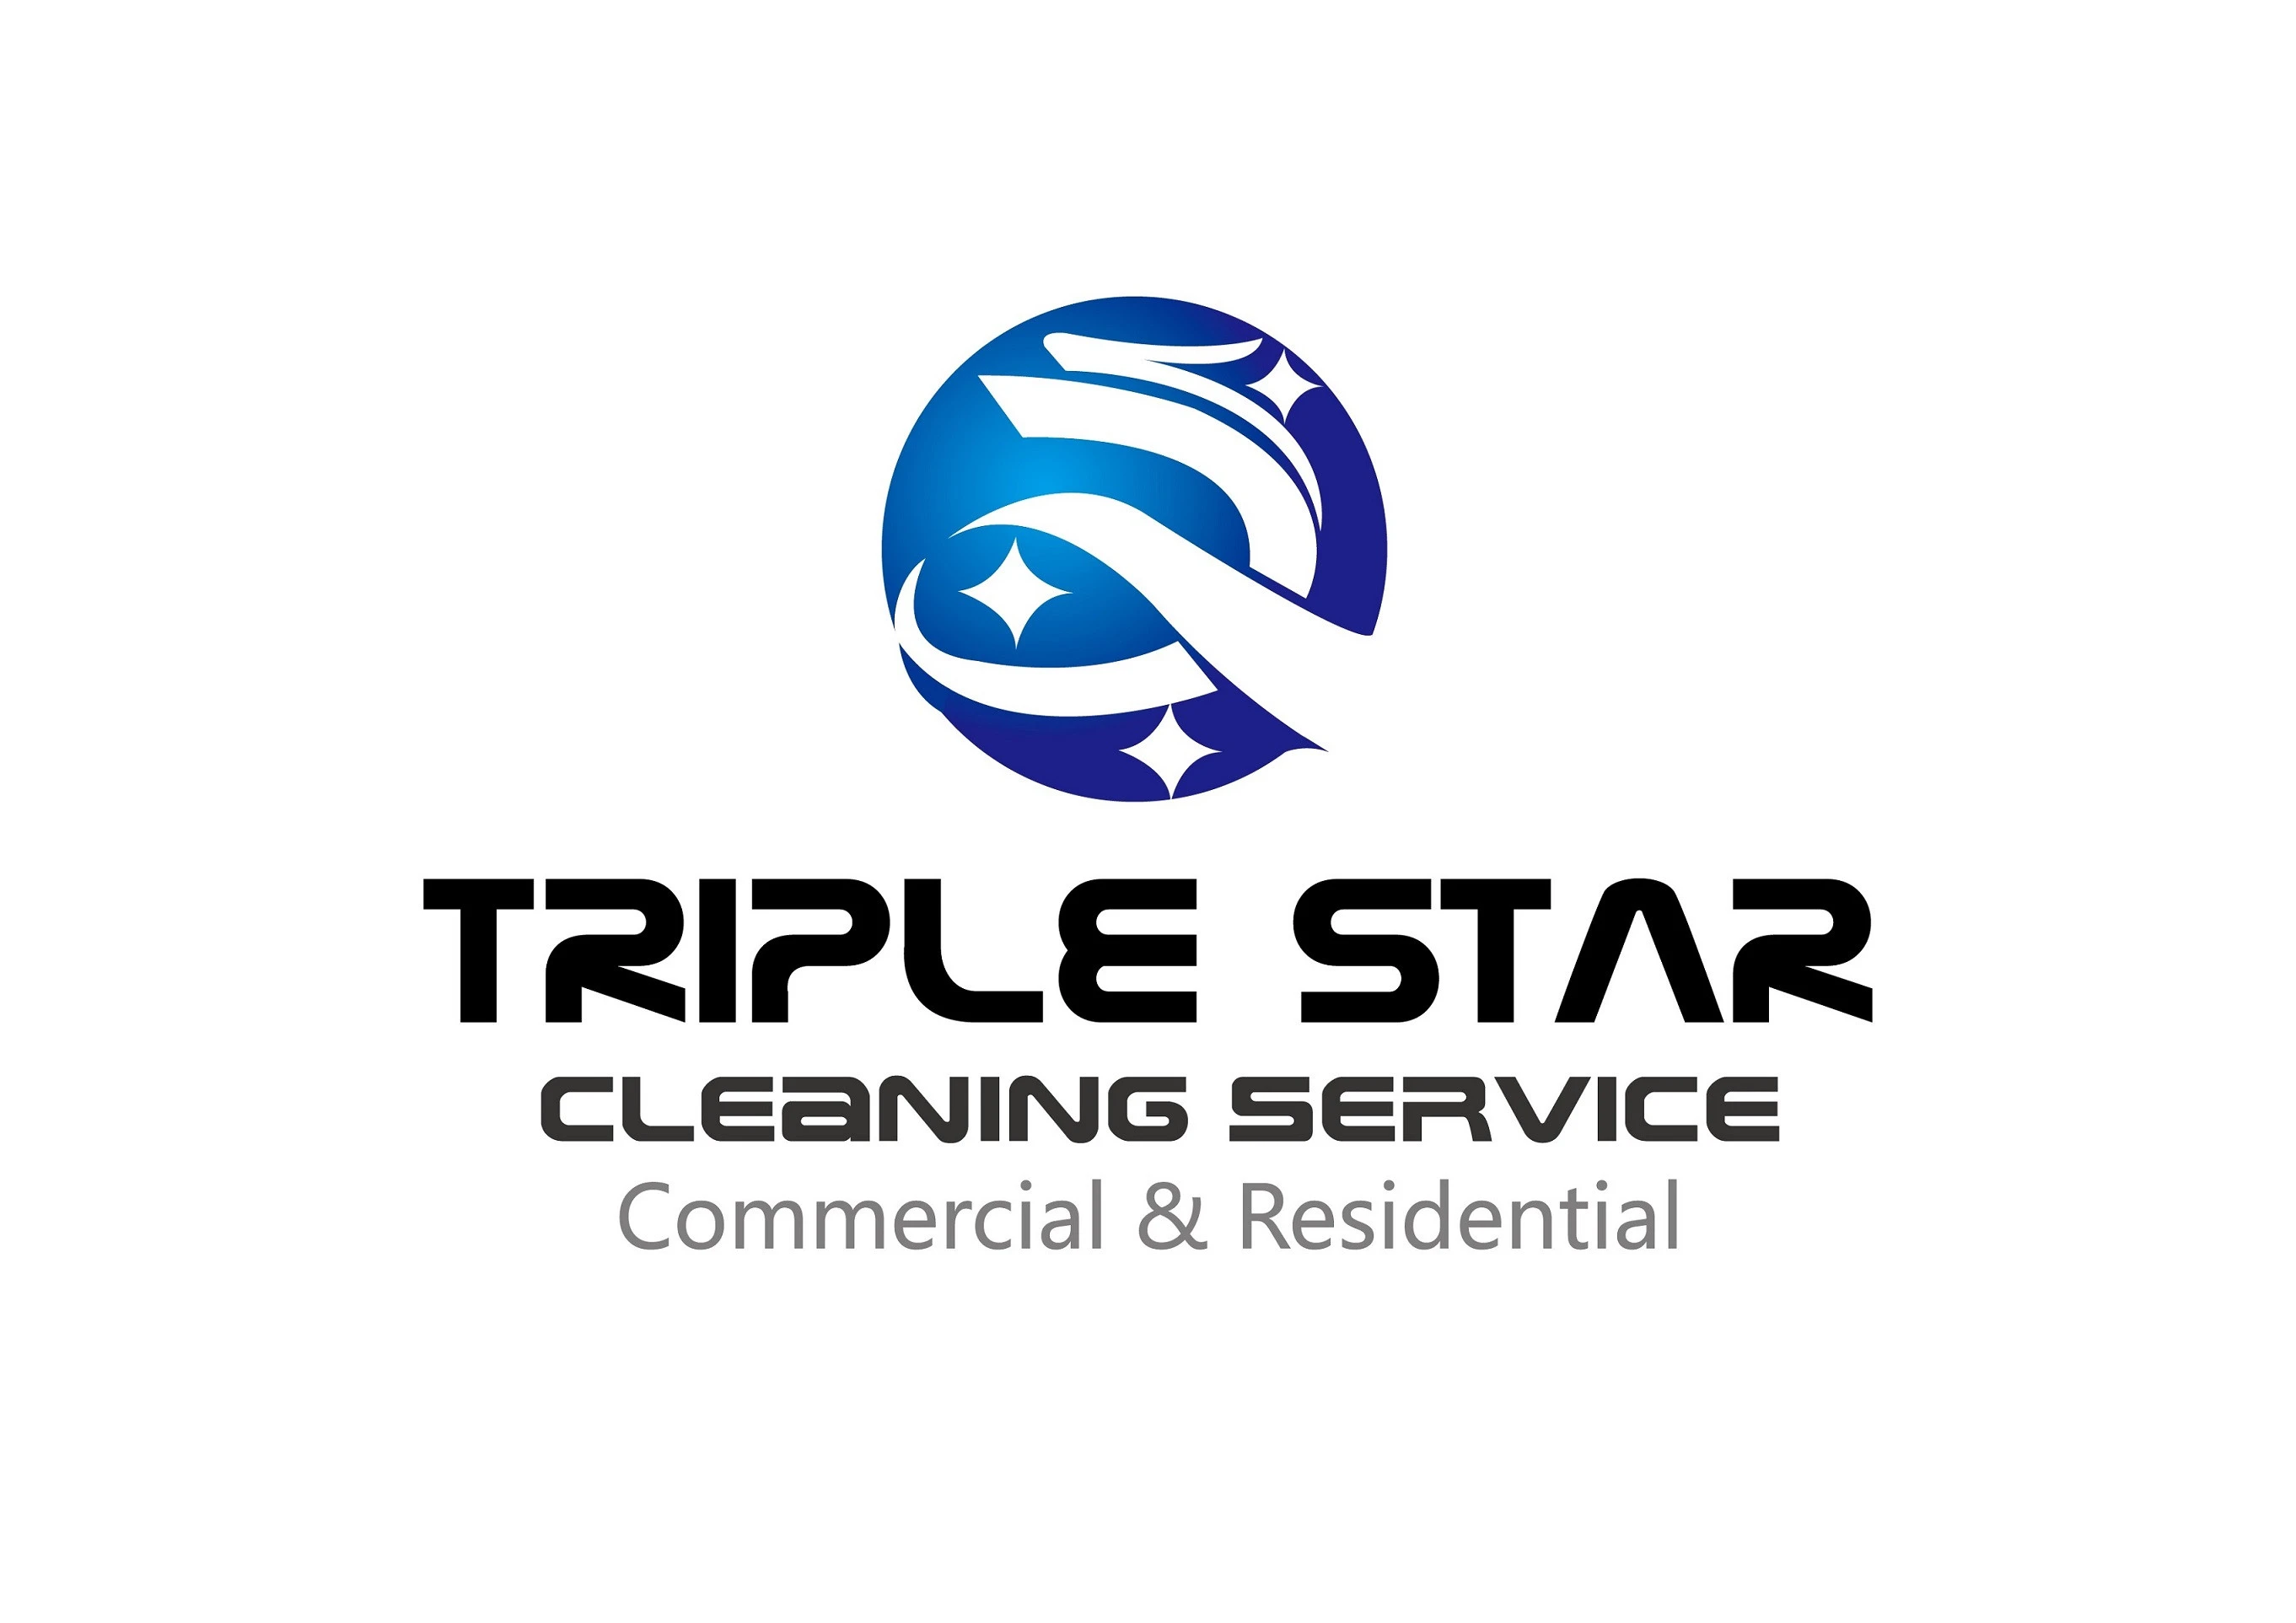 Triple Star Commercial Cleaning Services